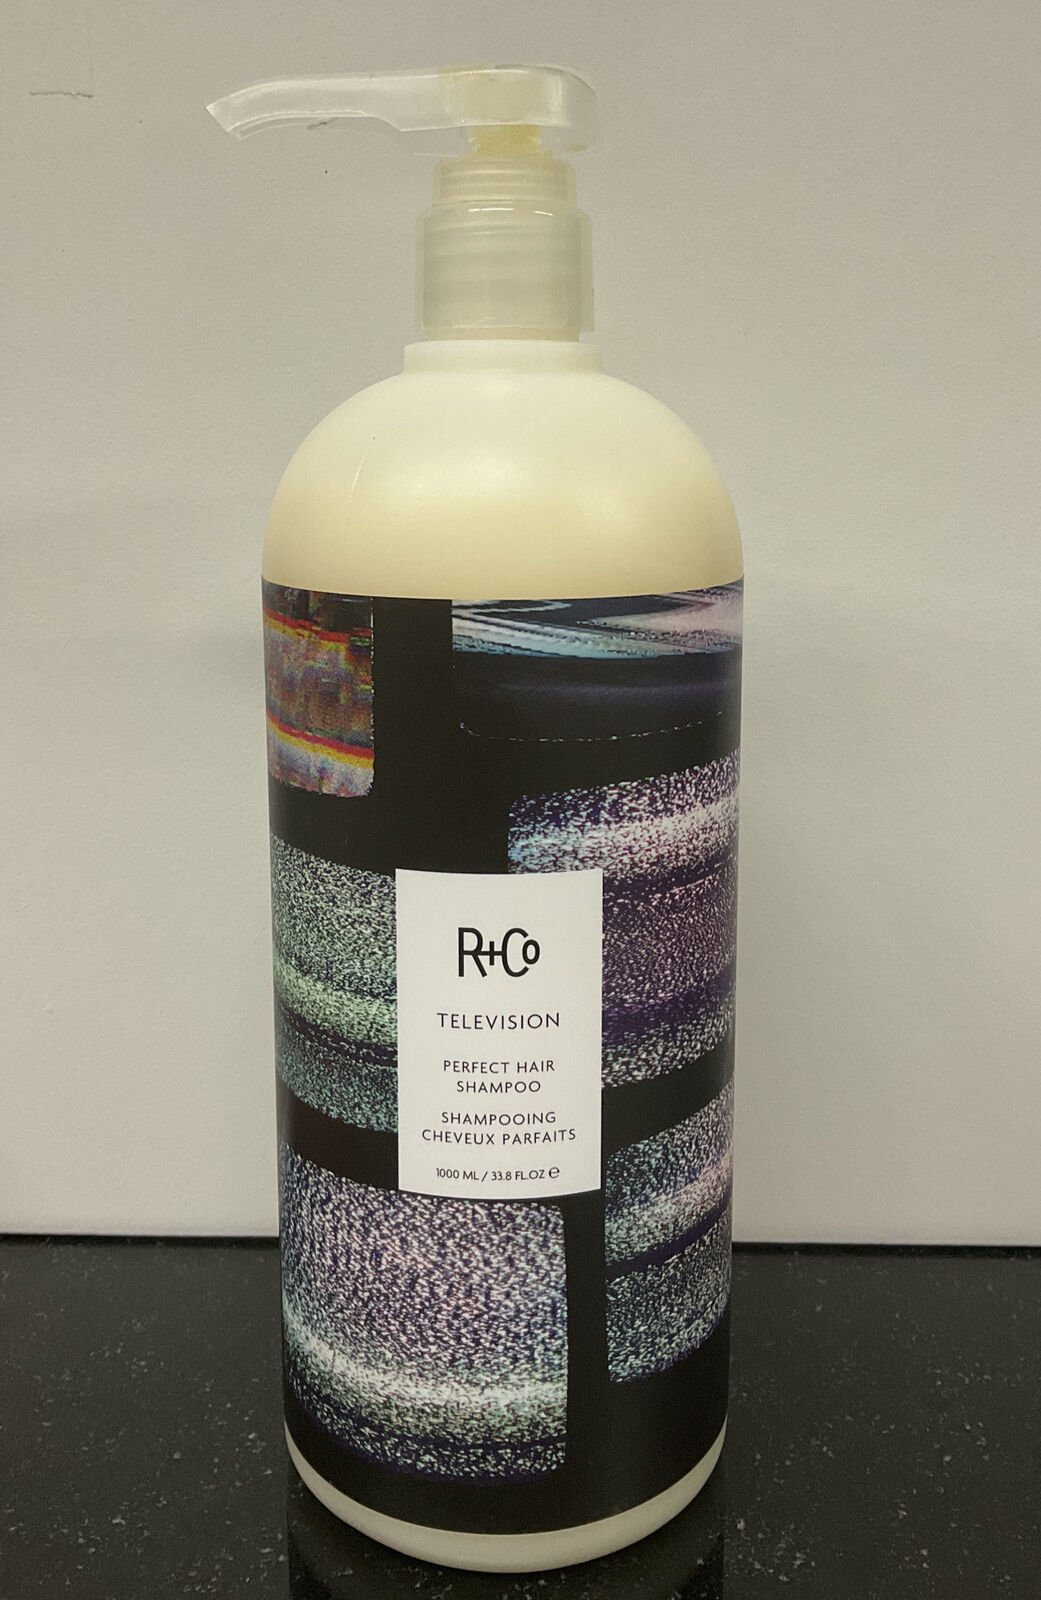 R+Co Television Perfect Hair Shampoo 33.8oz/1L As Pictured